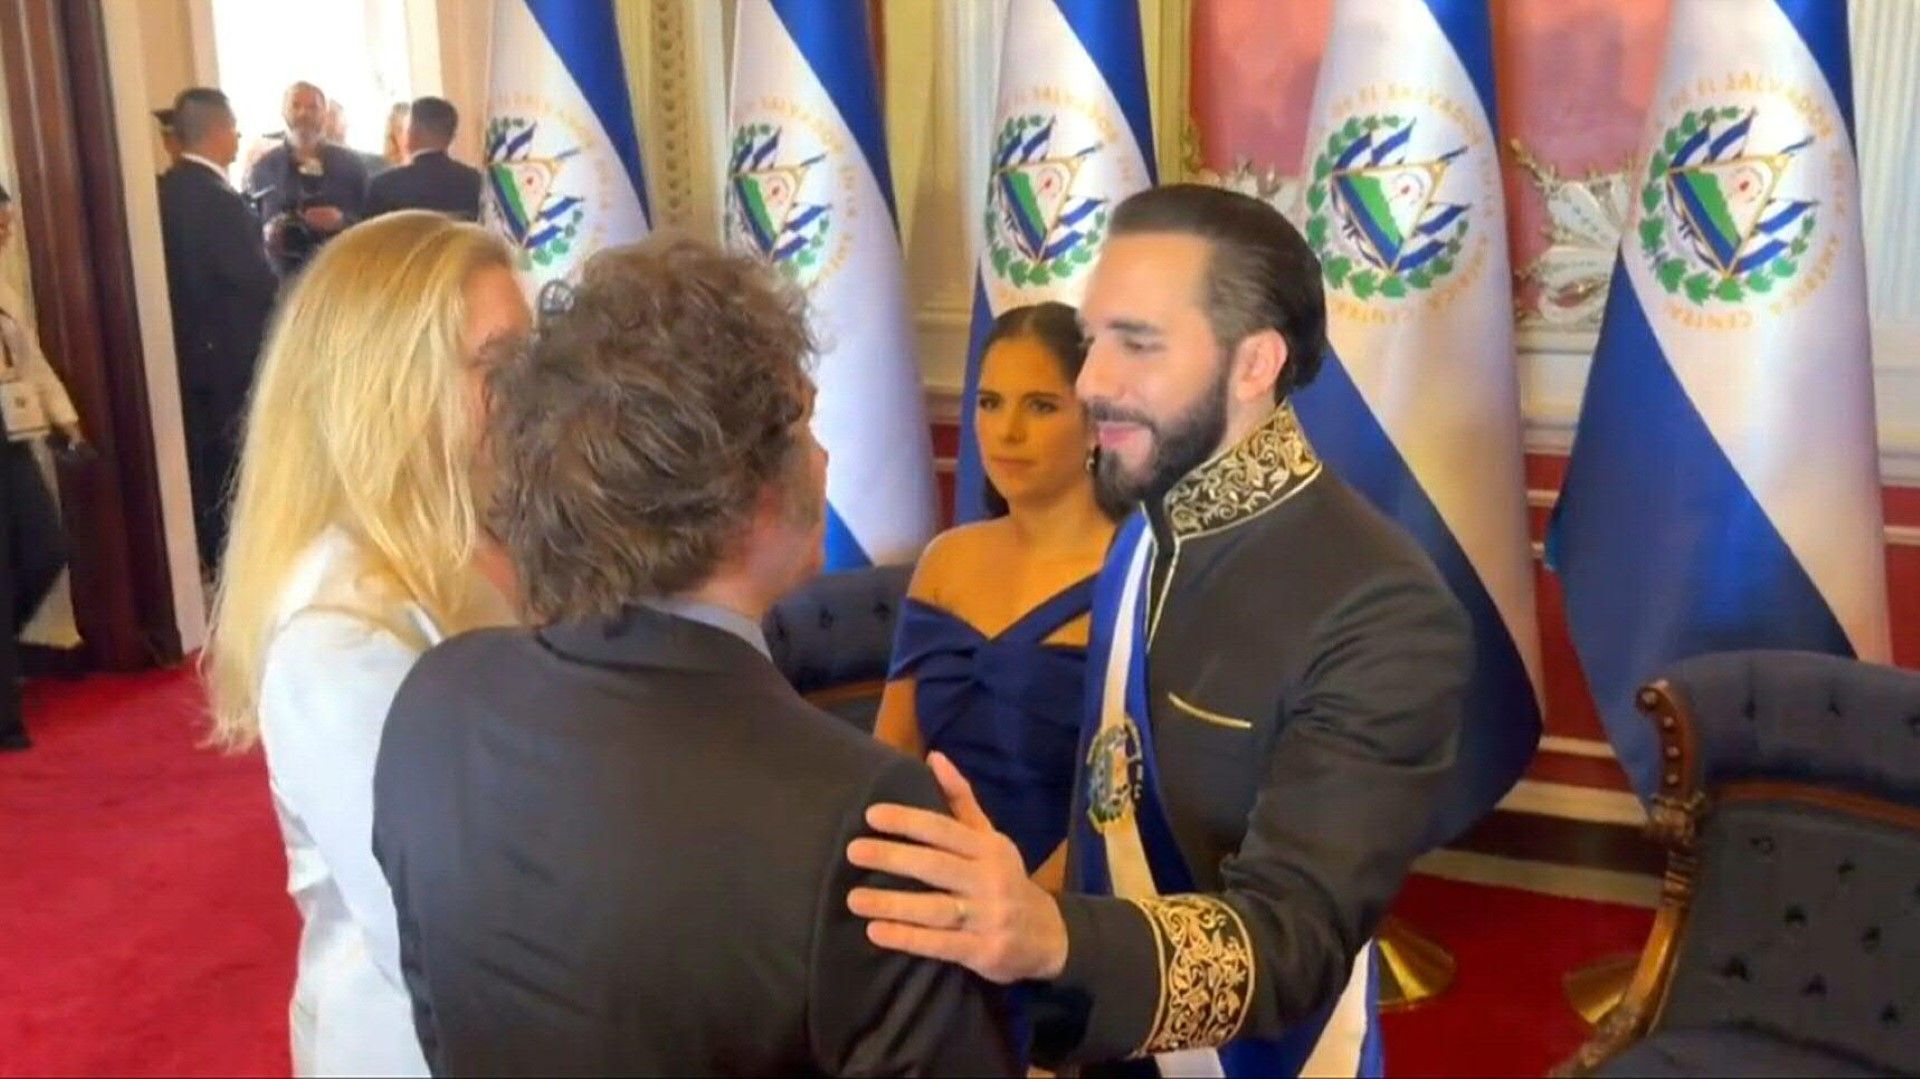 El Salvador: Bukele welcomes Milei to his inauguration ceremony